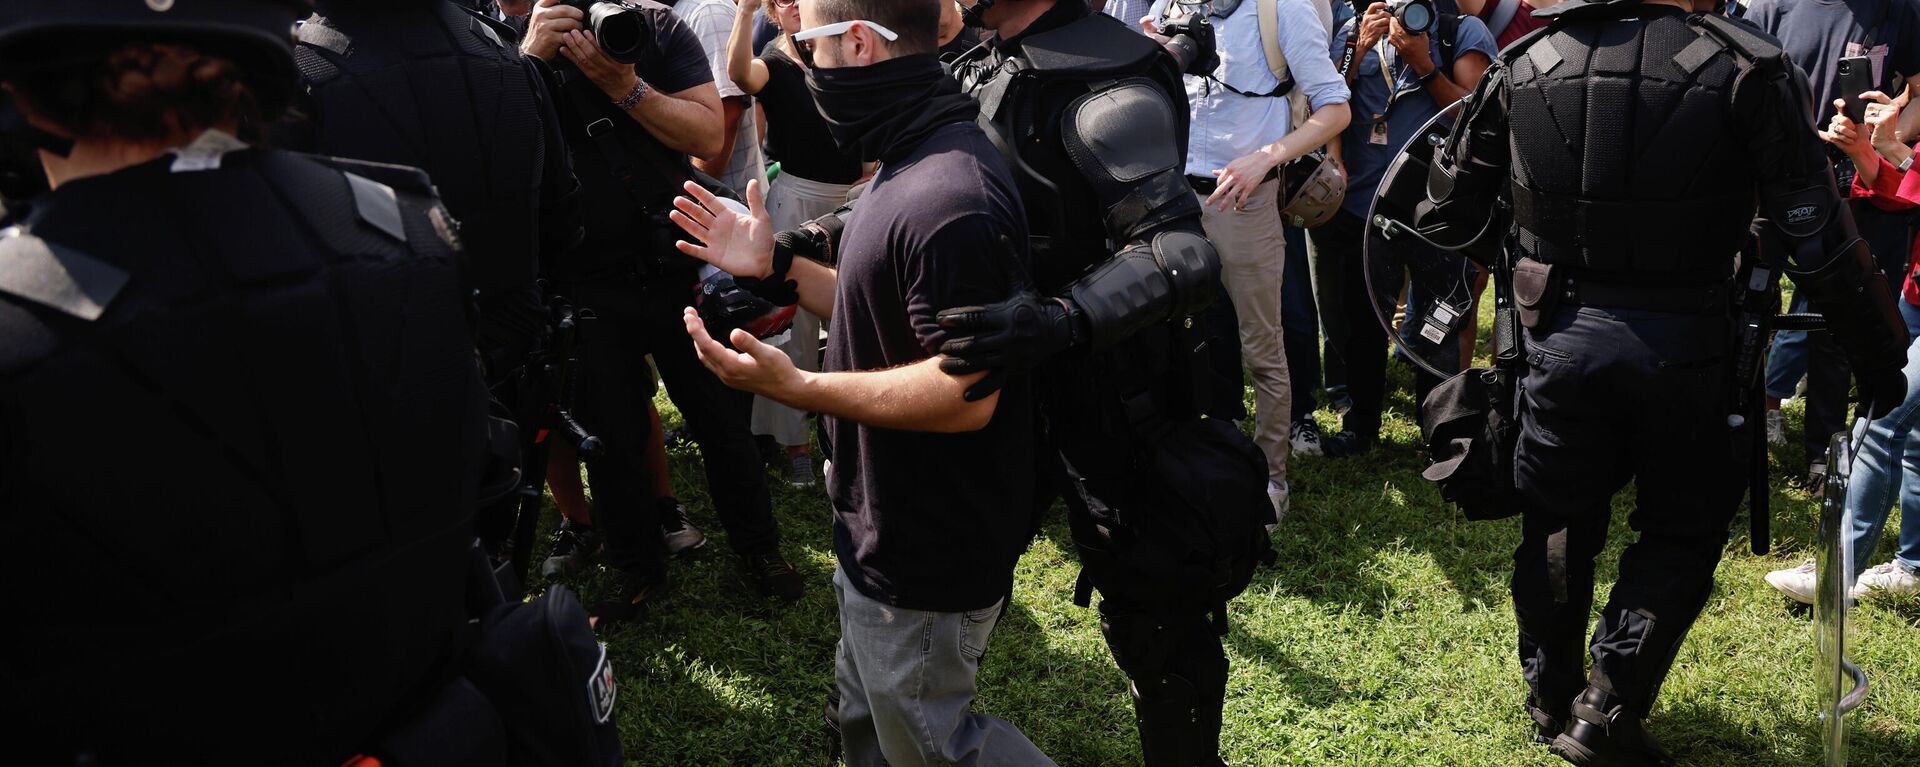 A police officer escorts a person during a rally in support of defendants being prosecuted in the January 6 attack on the U.S. Capitol, in Washington, D.C., U.S., September 18, 2021. REUTERS/Jonathan Ernst - Sputnik International, 1920, 19.09.2021